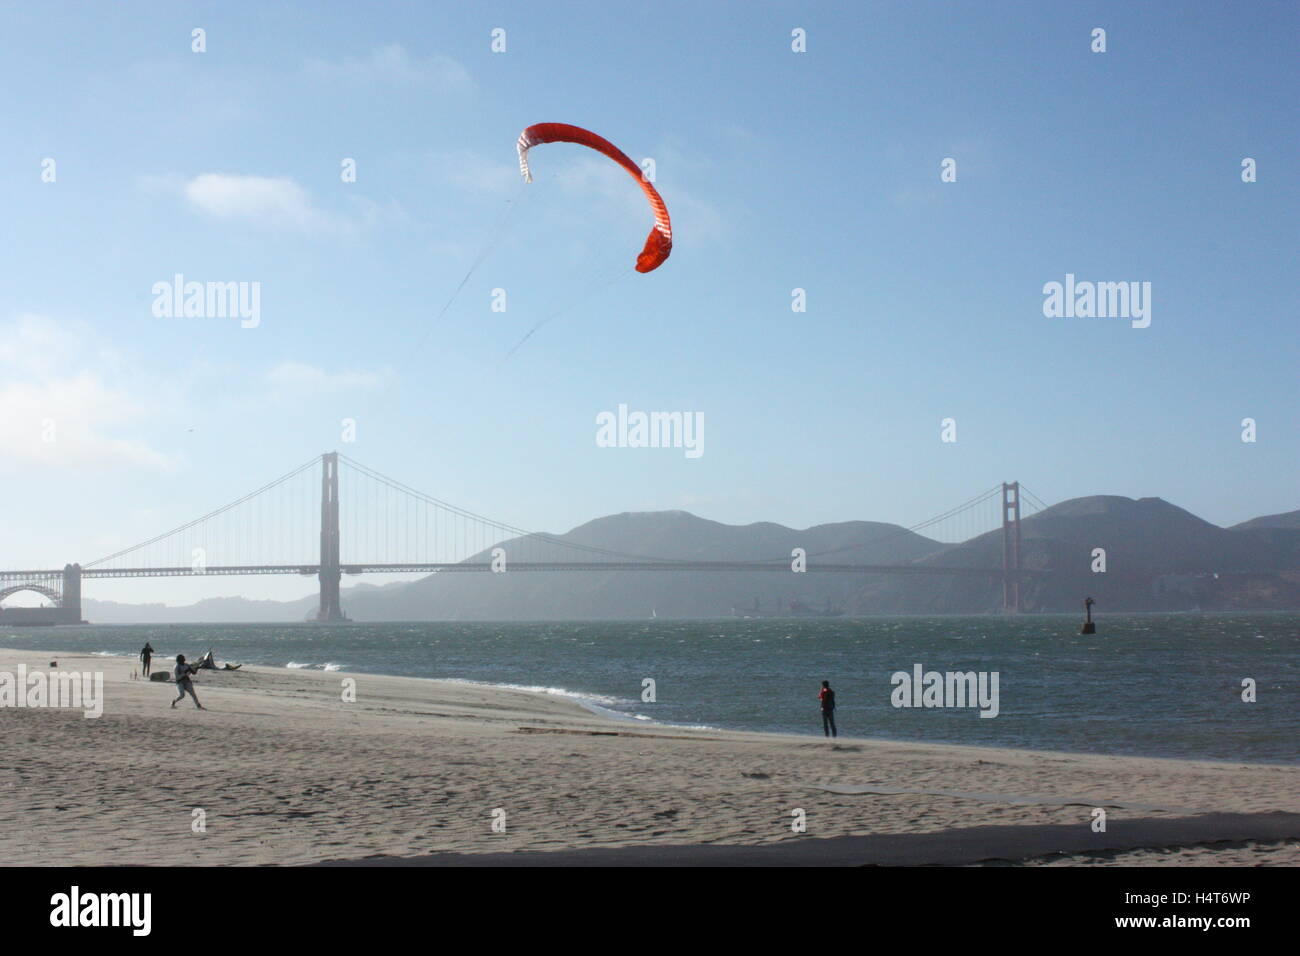 The Golden Gate Bridge with someone flying a kite on the beach next to the sea Stock Photo